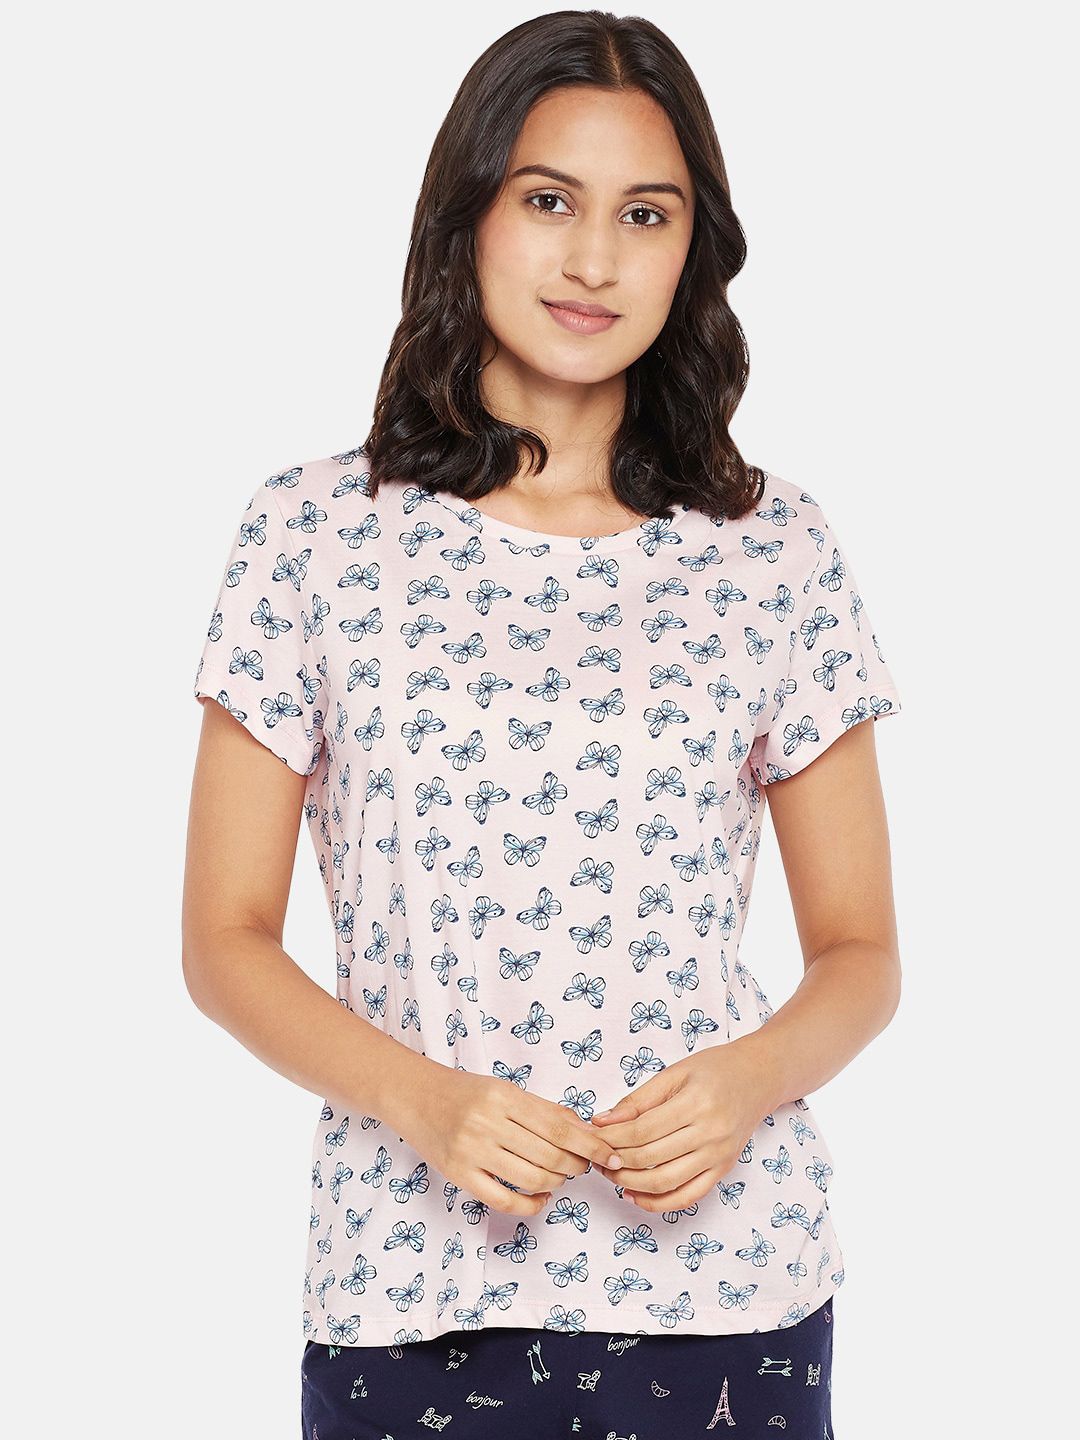 Dreamz by Pantaloons Women Pink Pure Cotton Butterfly Printed Regular Top Price in India